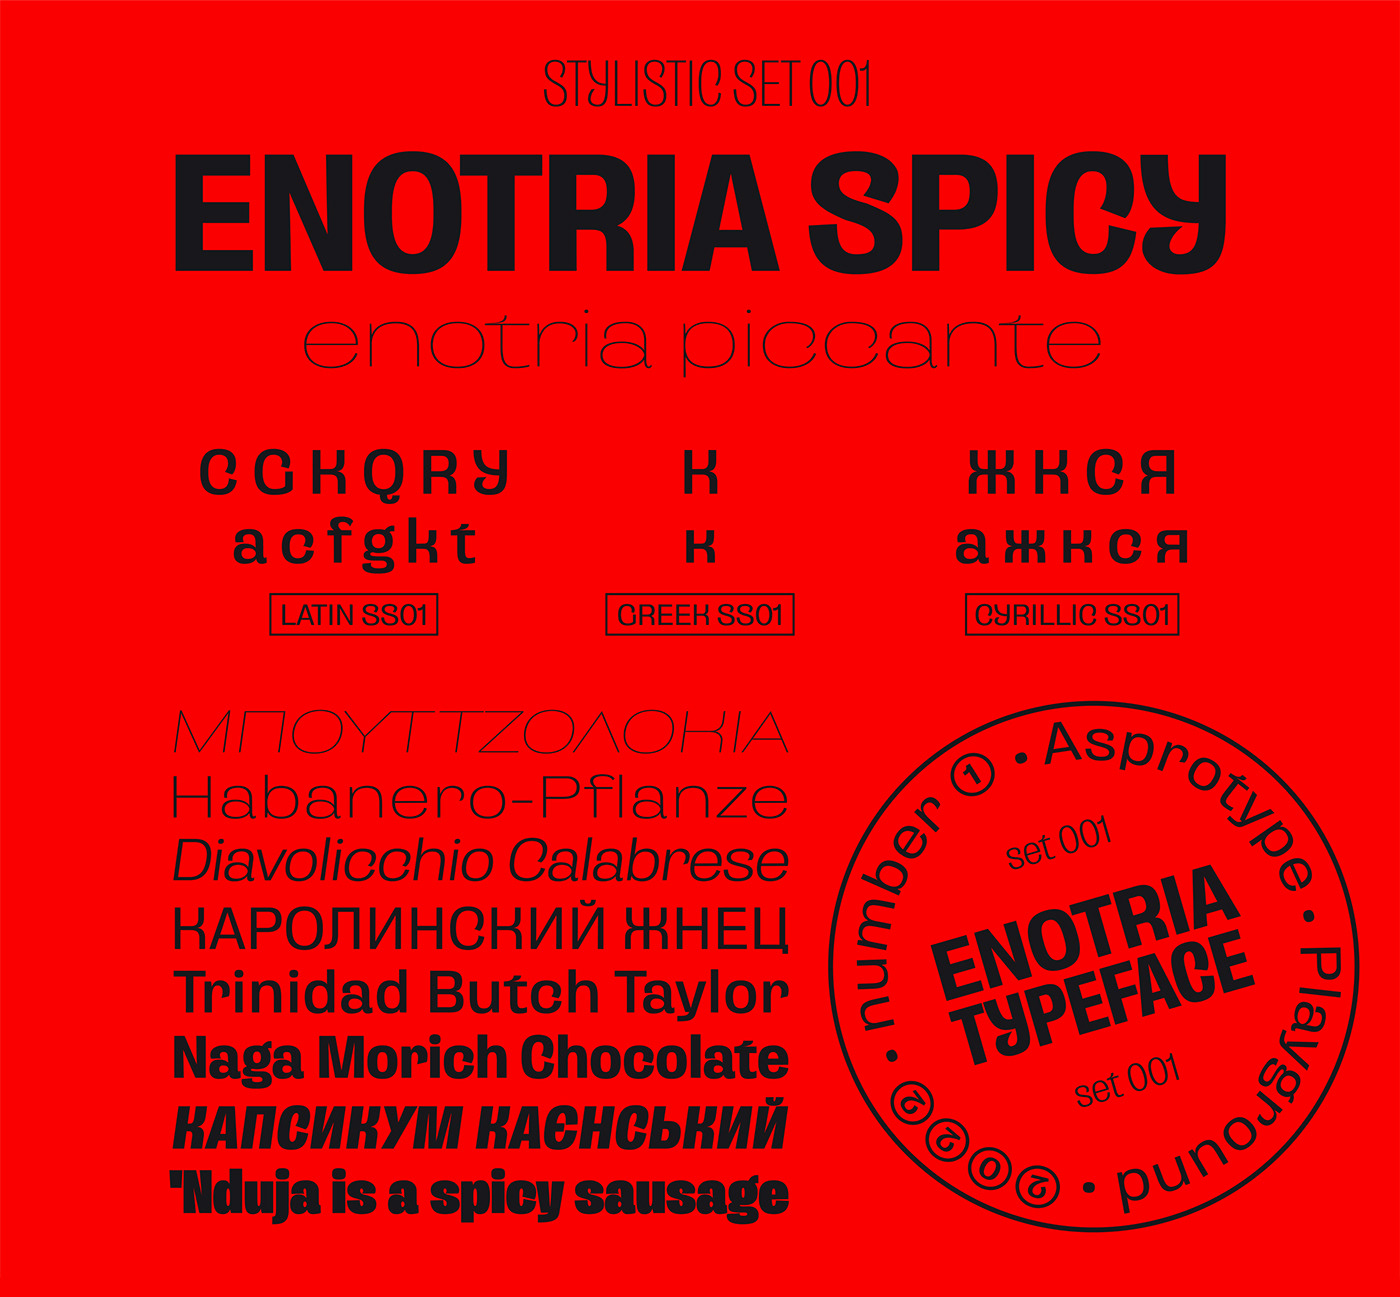 font sans Typeface condensed cyrillic typeface Expanded Greek typeface grotesk grotesque typedesign